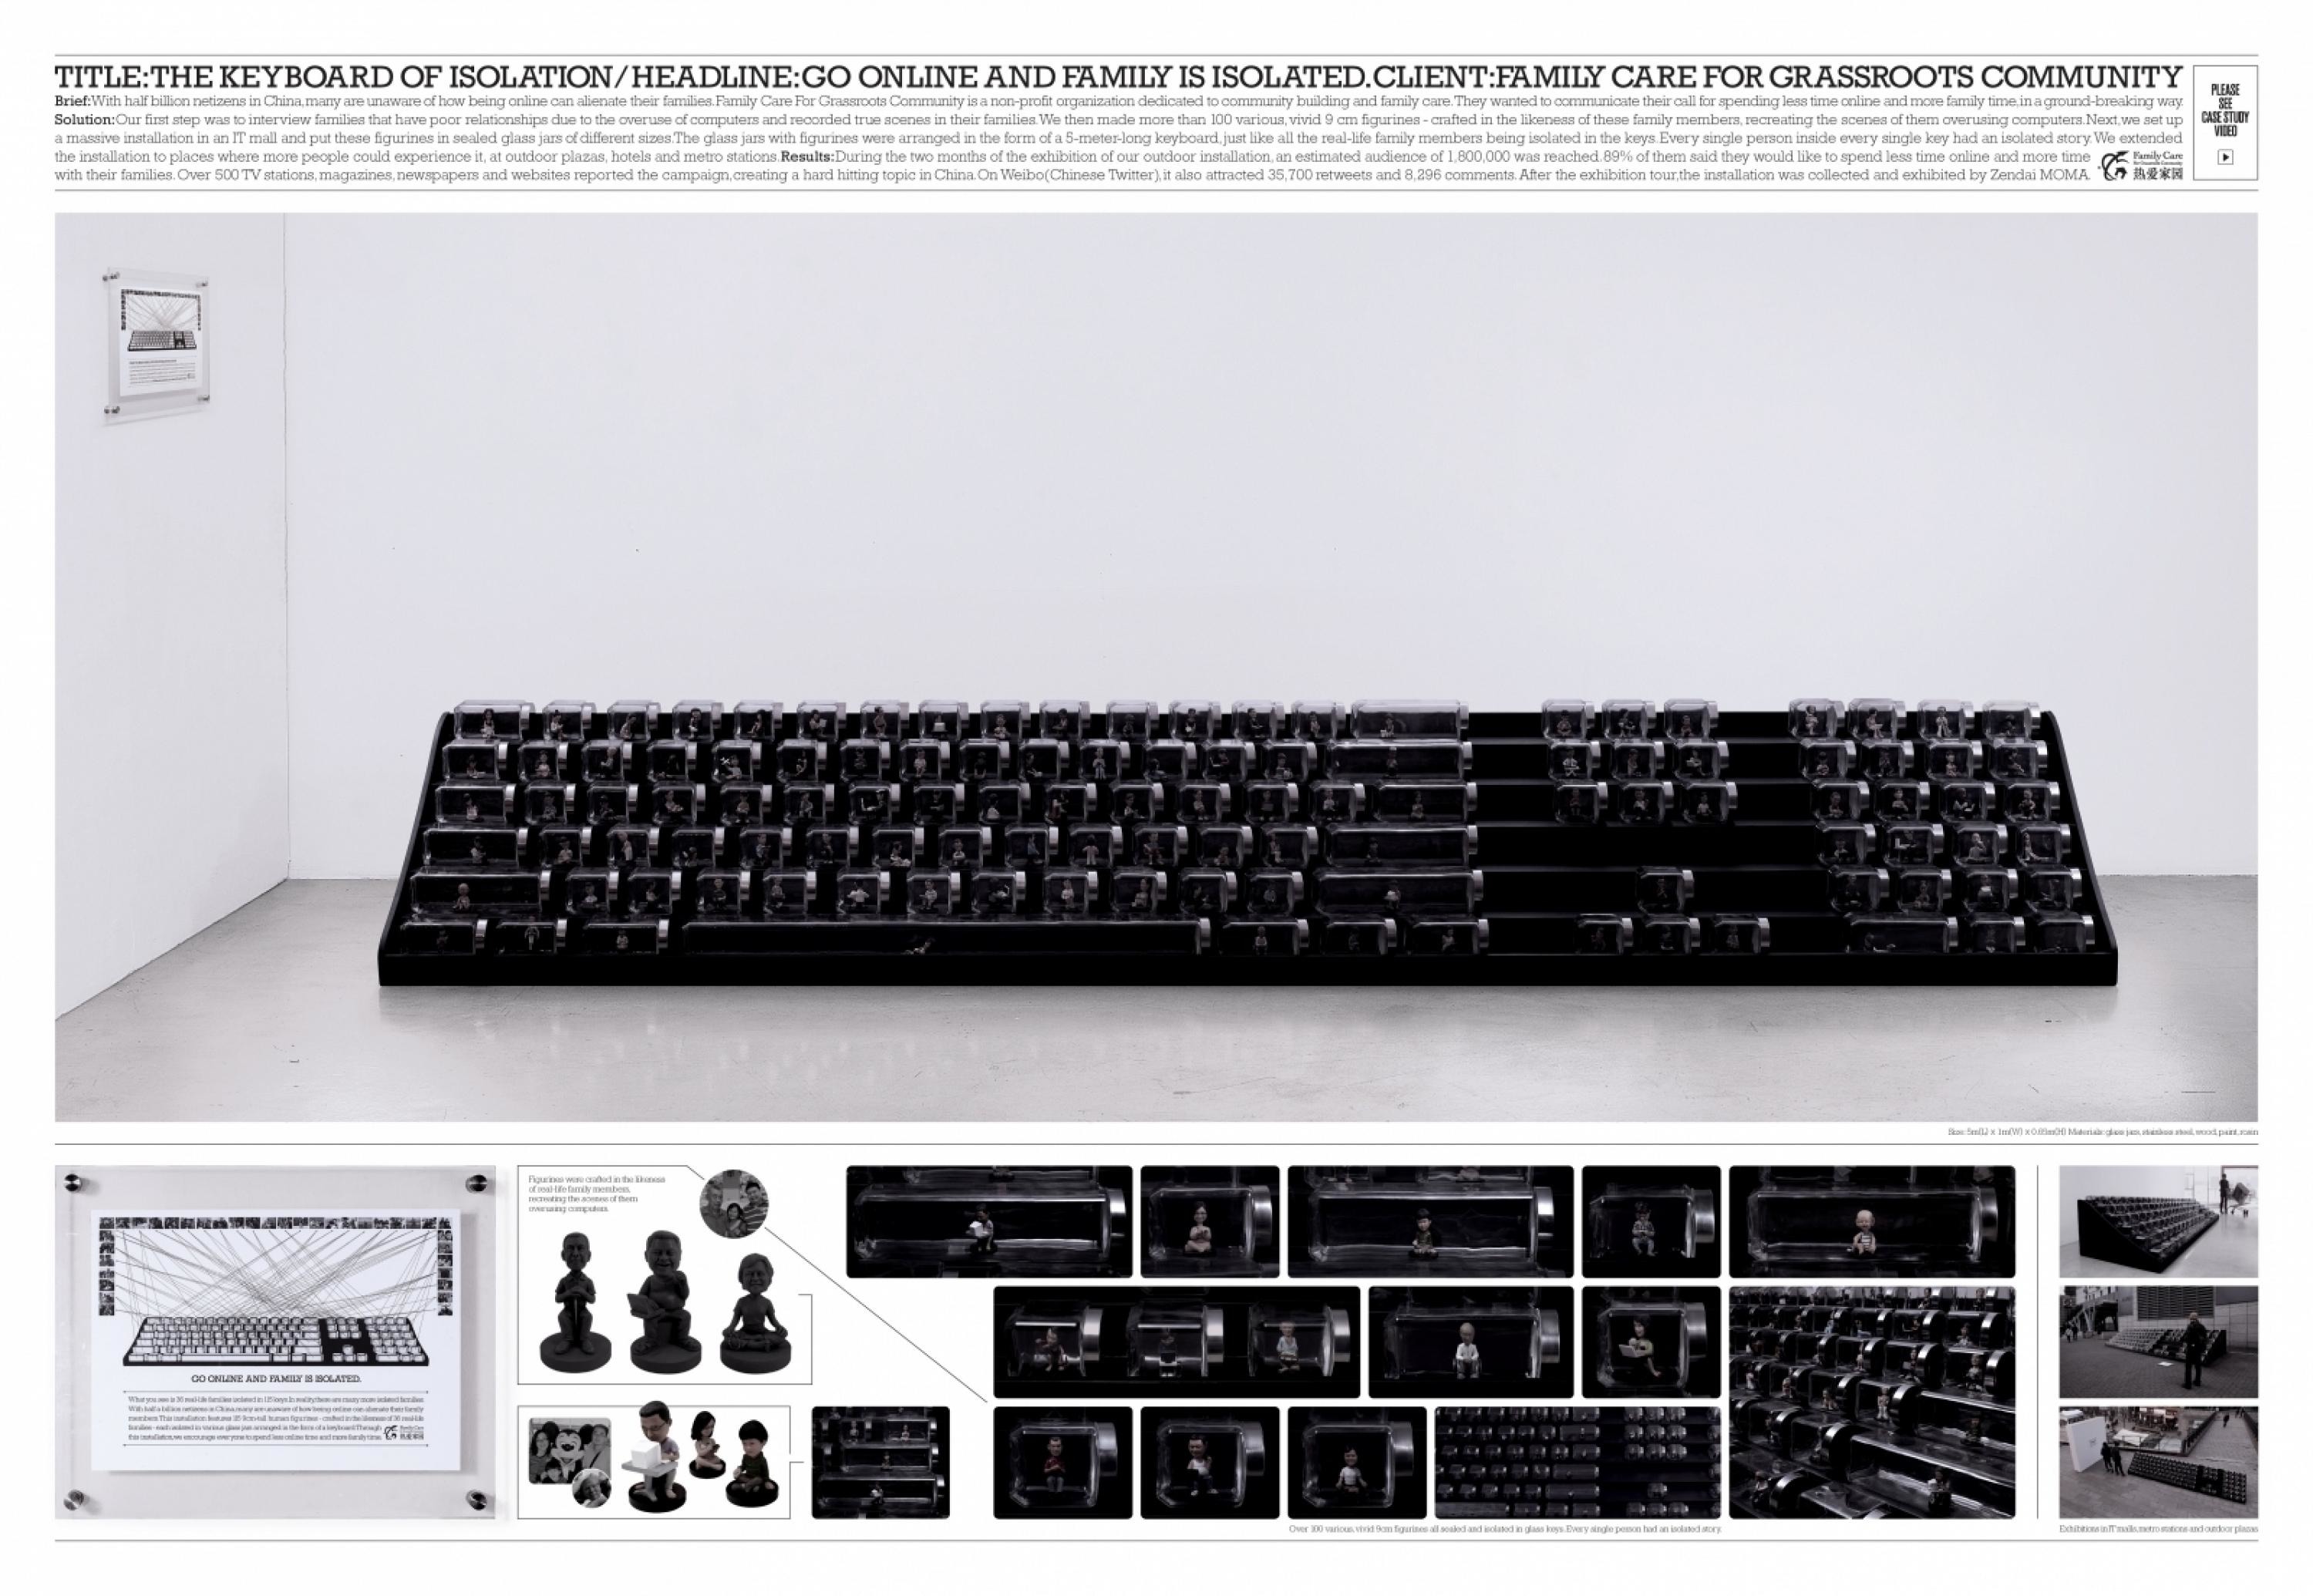 THE KEYBOARD OF ISOLATION